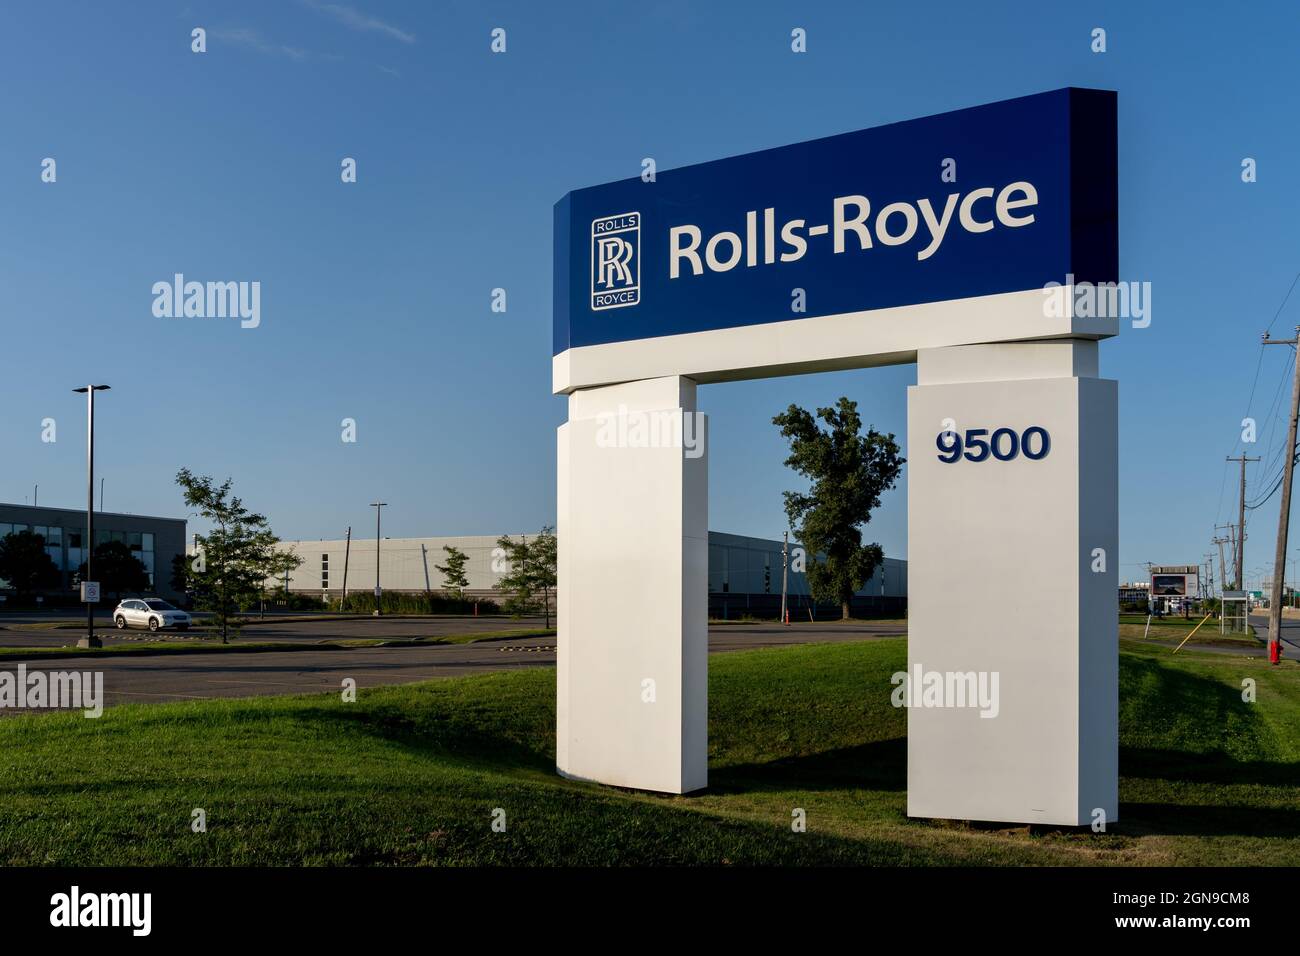 Montreal, QC, Canada - September 4, 2021: Close up of Rolls-Royce sign at their Canadian head office in Montreal, QC, Canada. Stock Photo